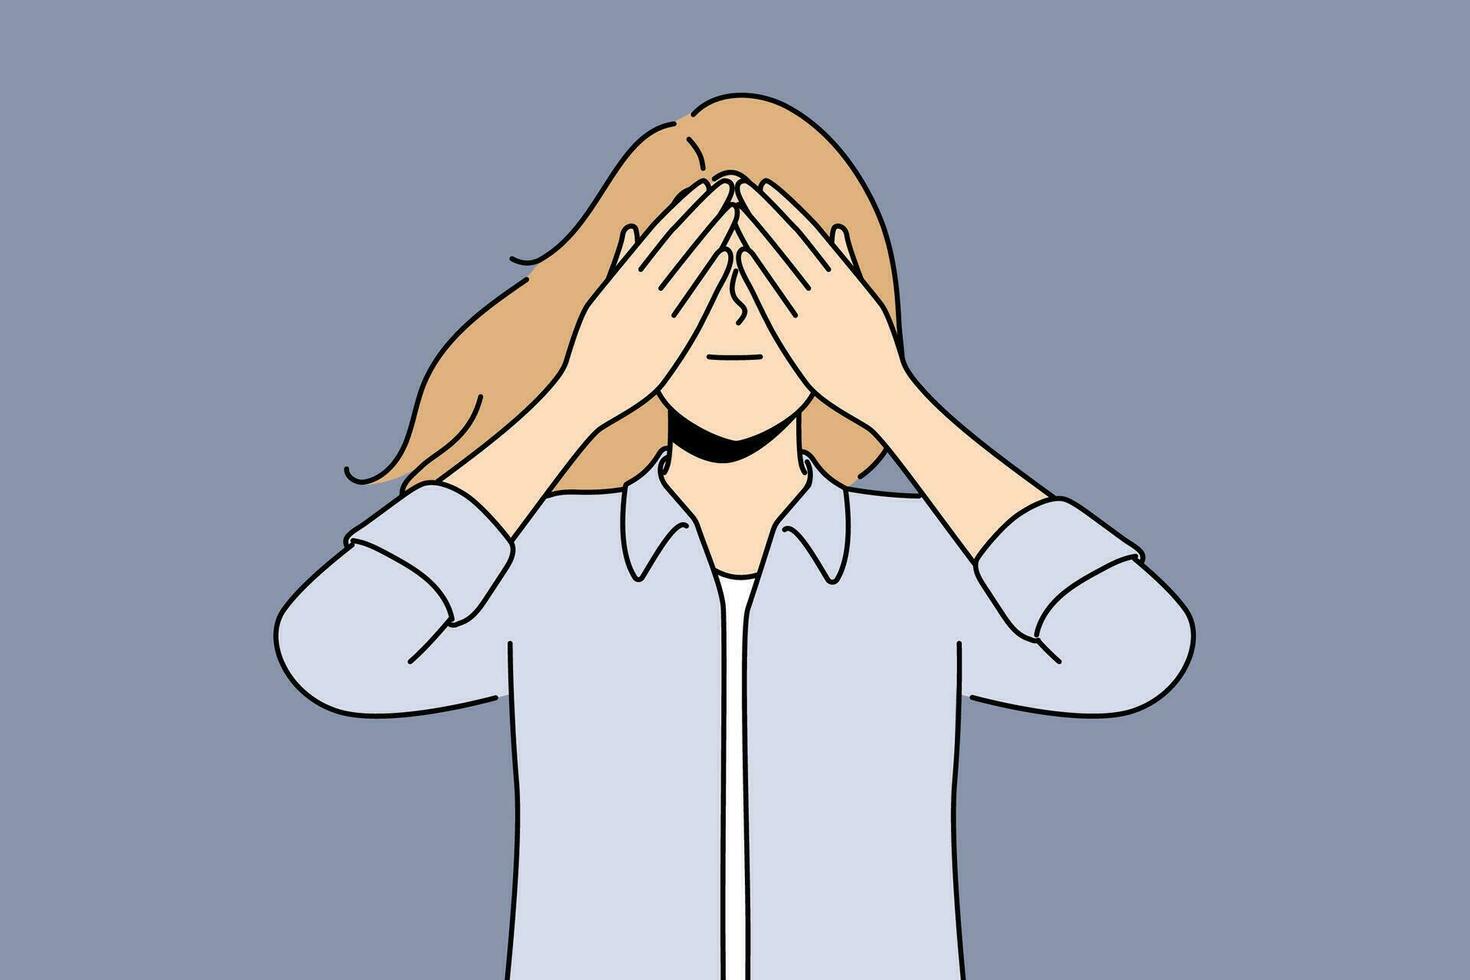 Woman closes eyes in anticipation of surprise or playing with small child. Young girl closes eyes and acts up not wanting to see unpleasant things or trying to hide in order to avoid stress. vector